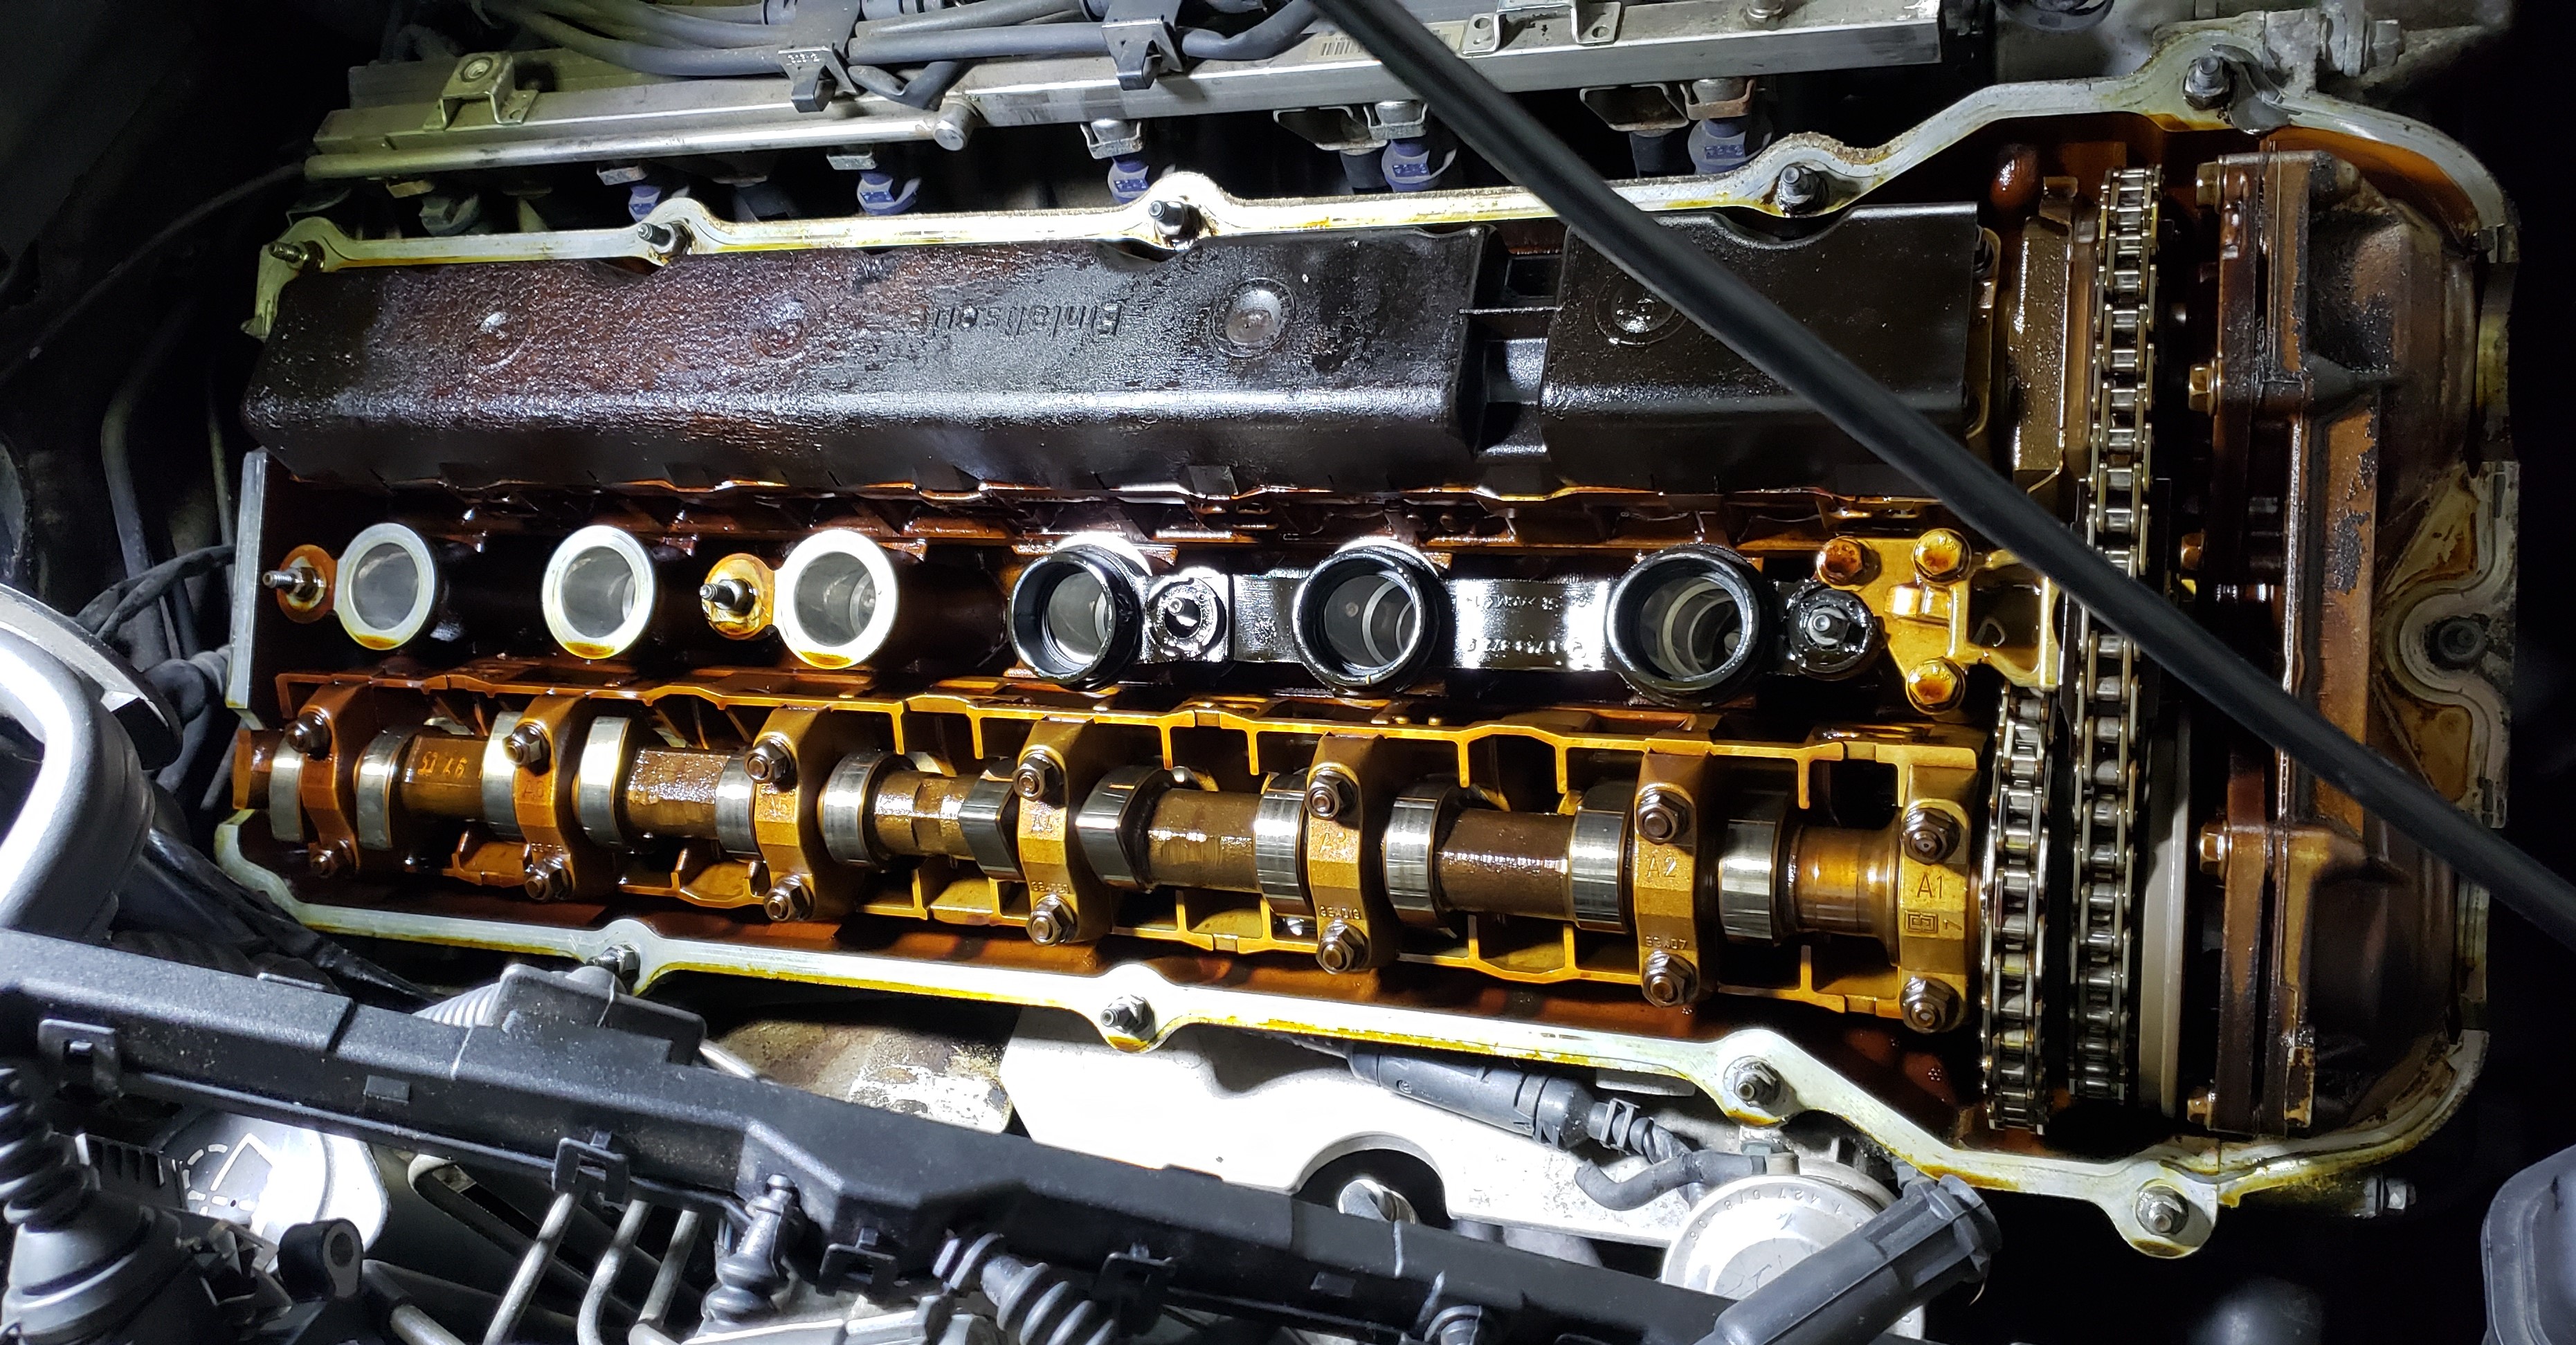 E39 Valve Cover Gasket Replacement 